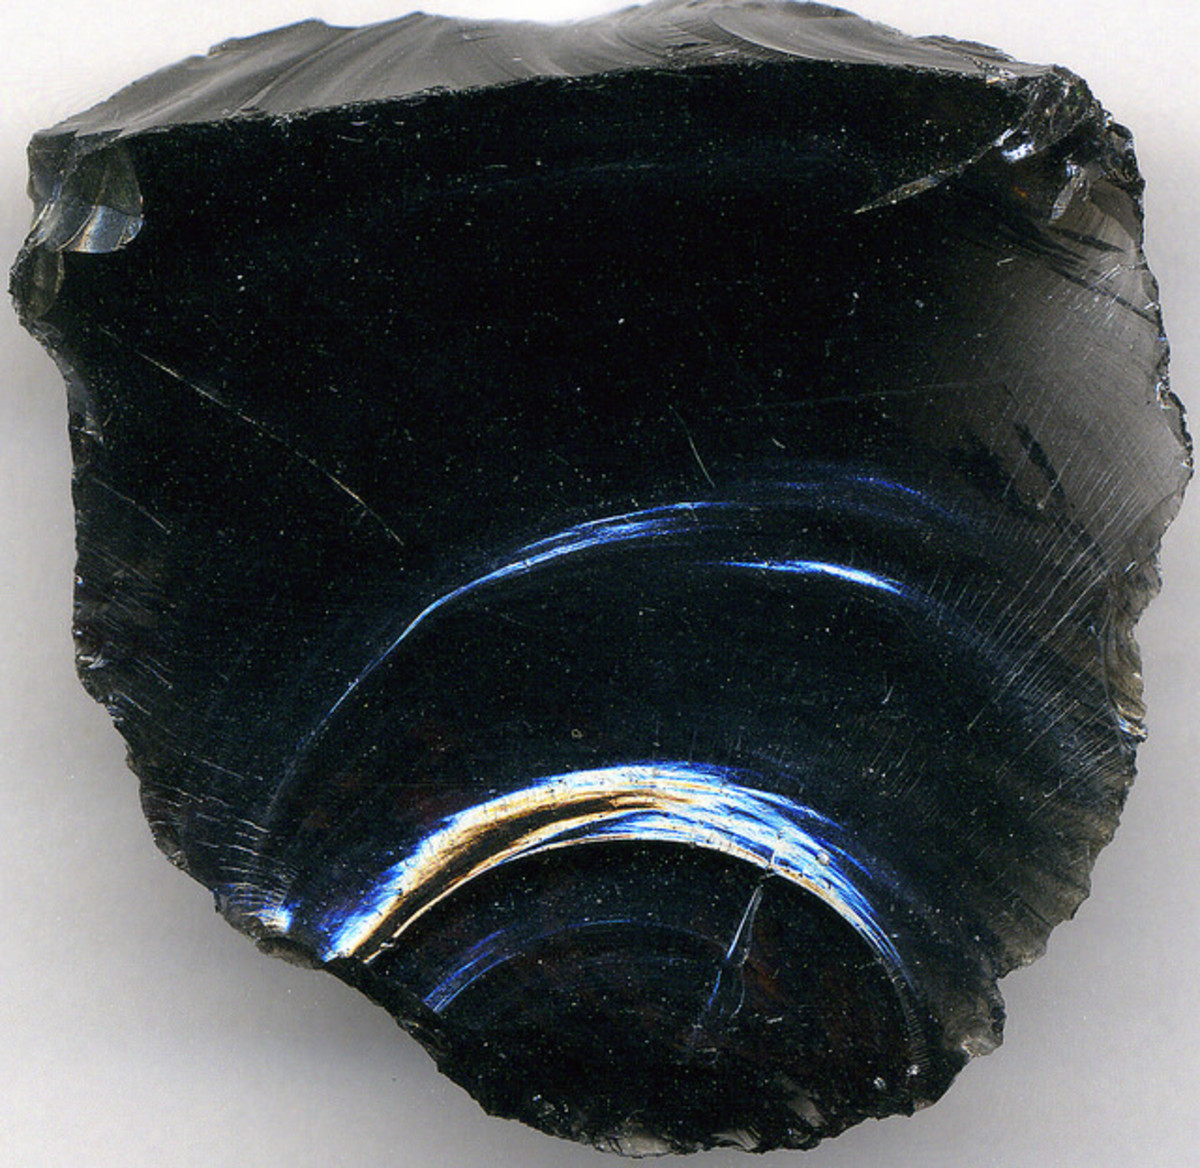 Obsidian is formed when molten lava cools so quickly that it does not have time to crystallise.